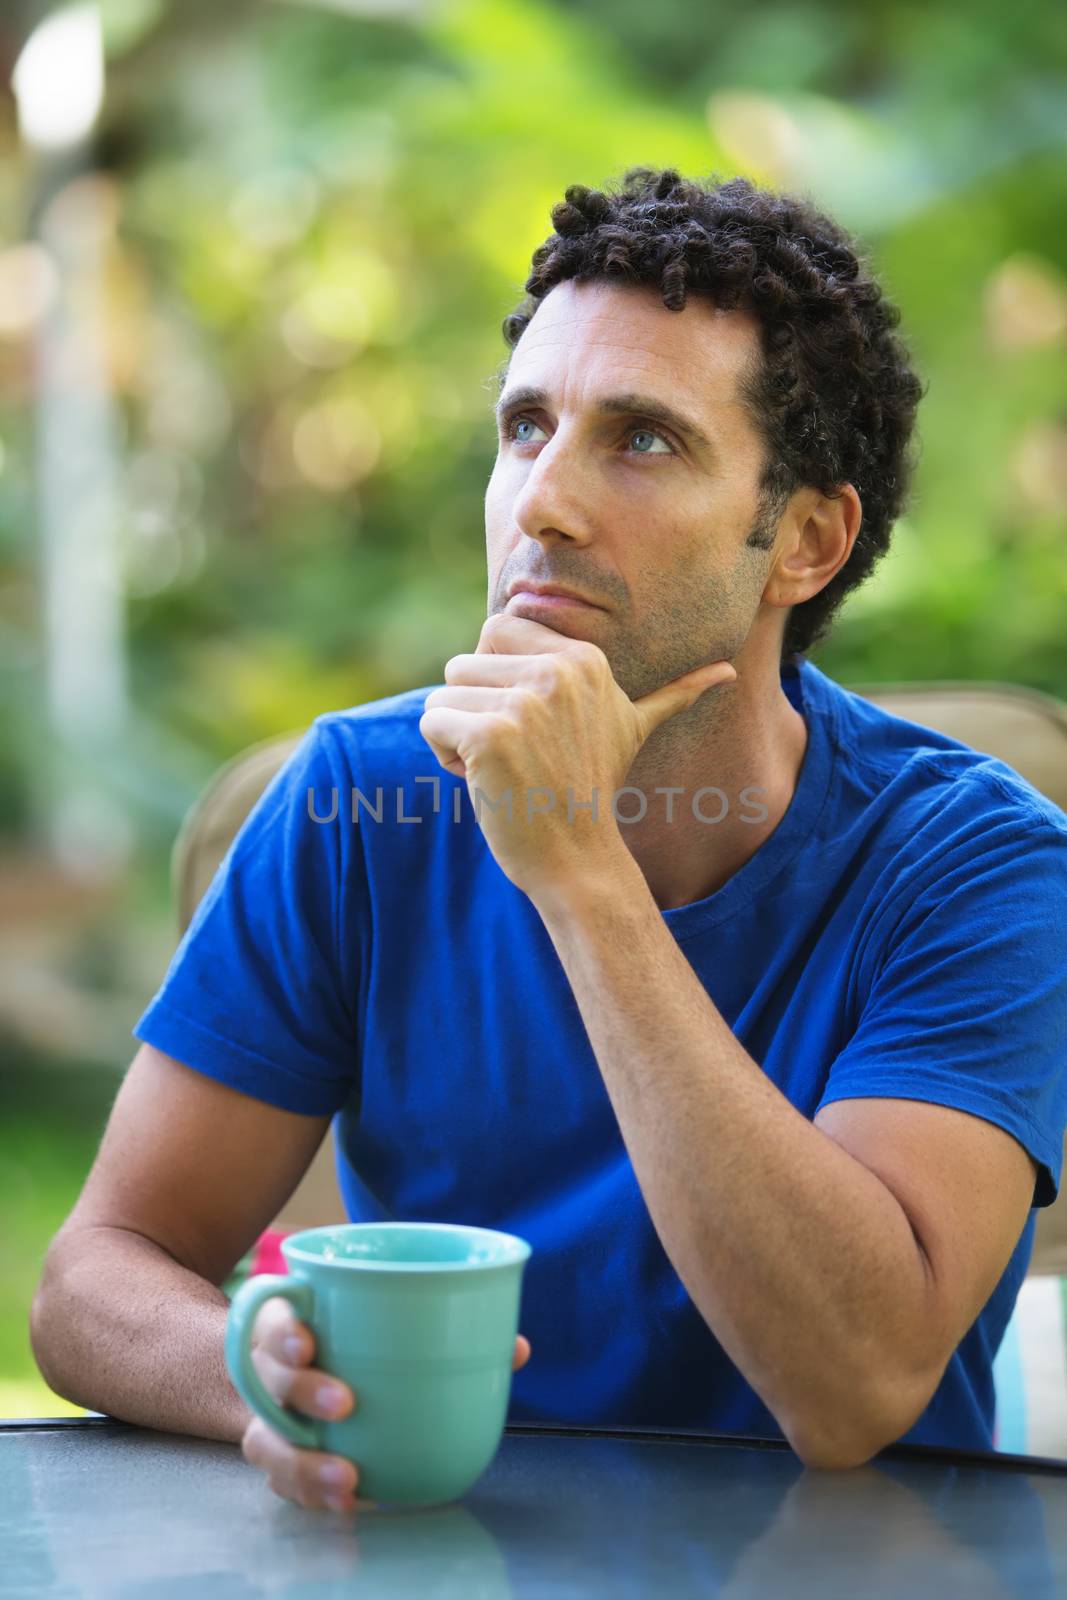 Pensive Caucasian adult sitting outdoors in Maui